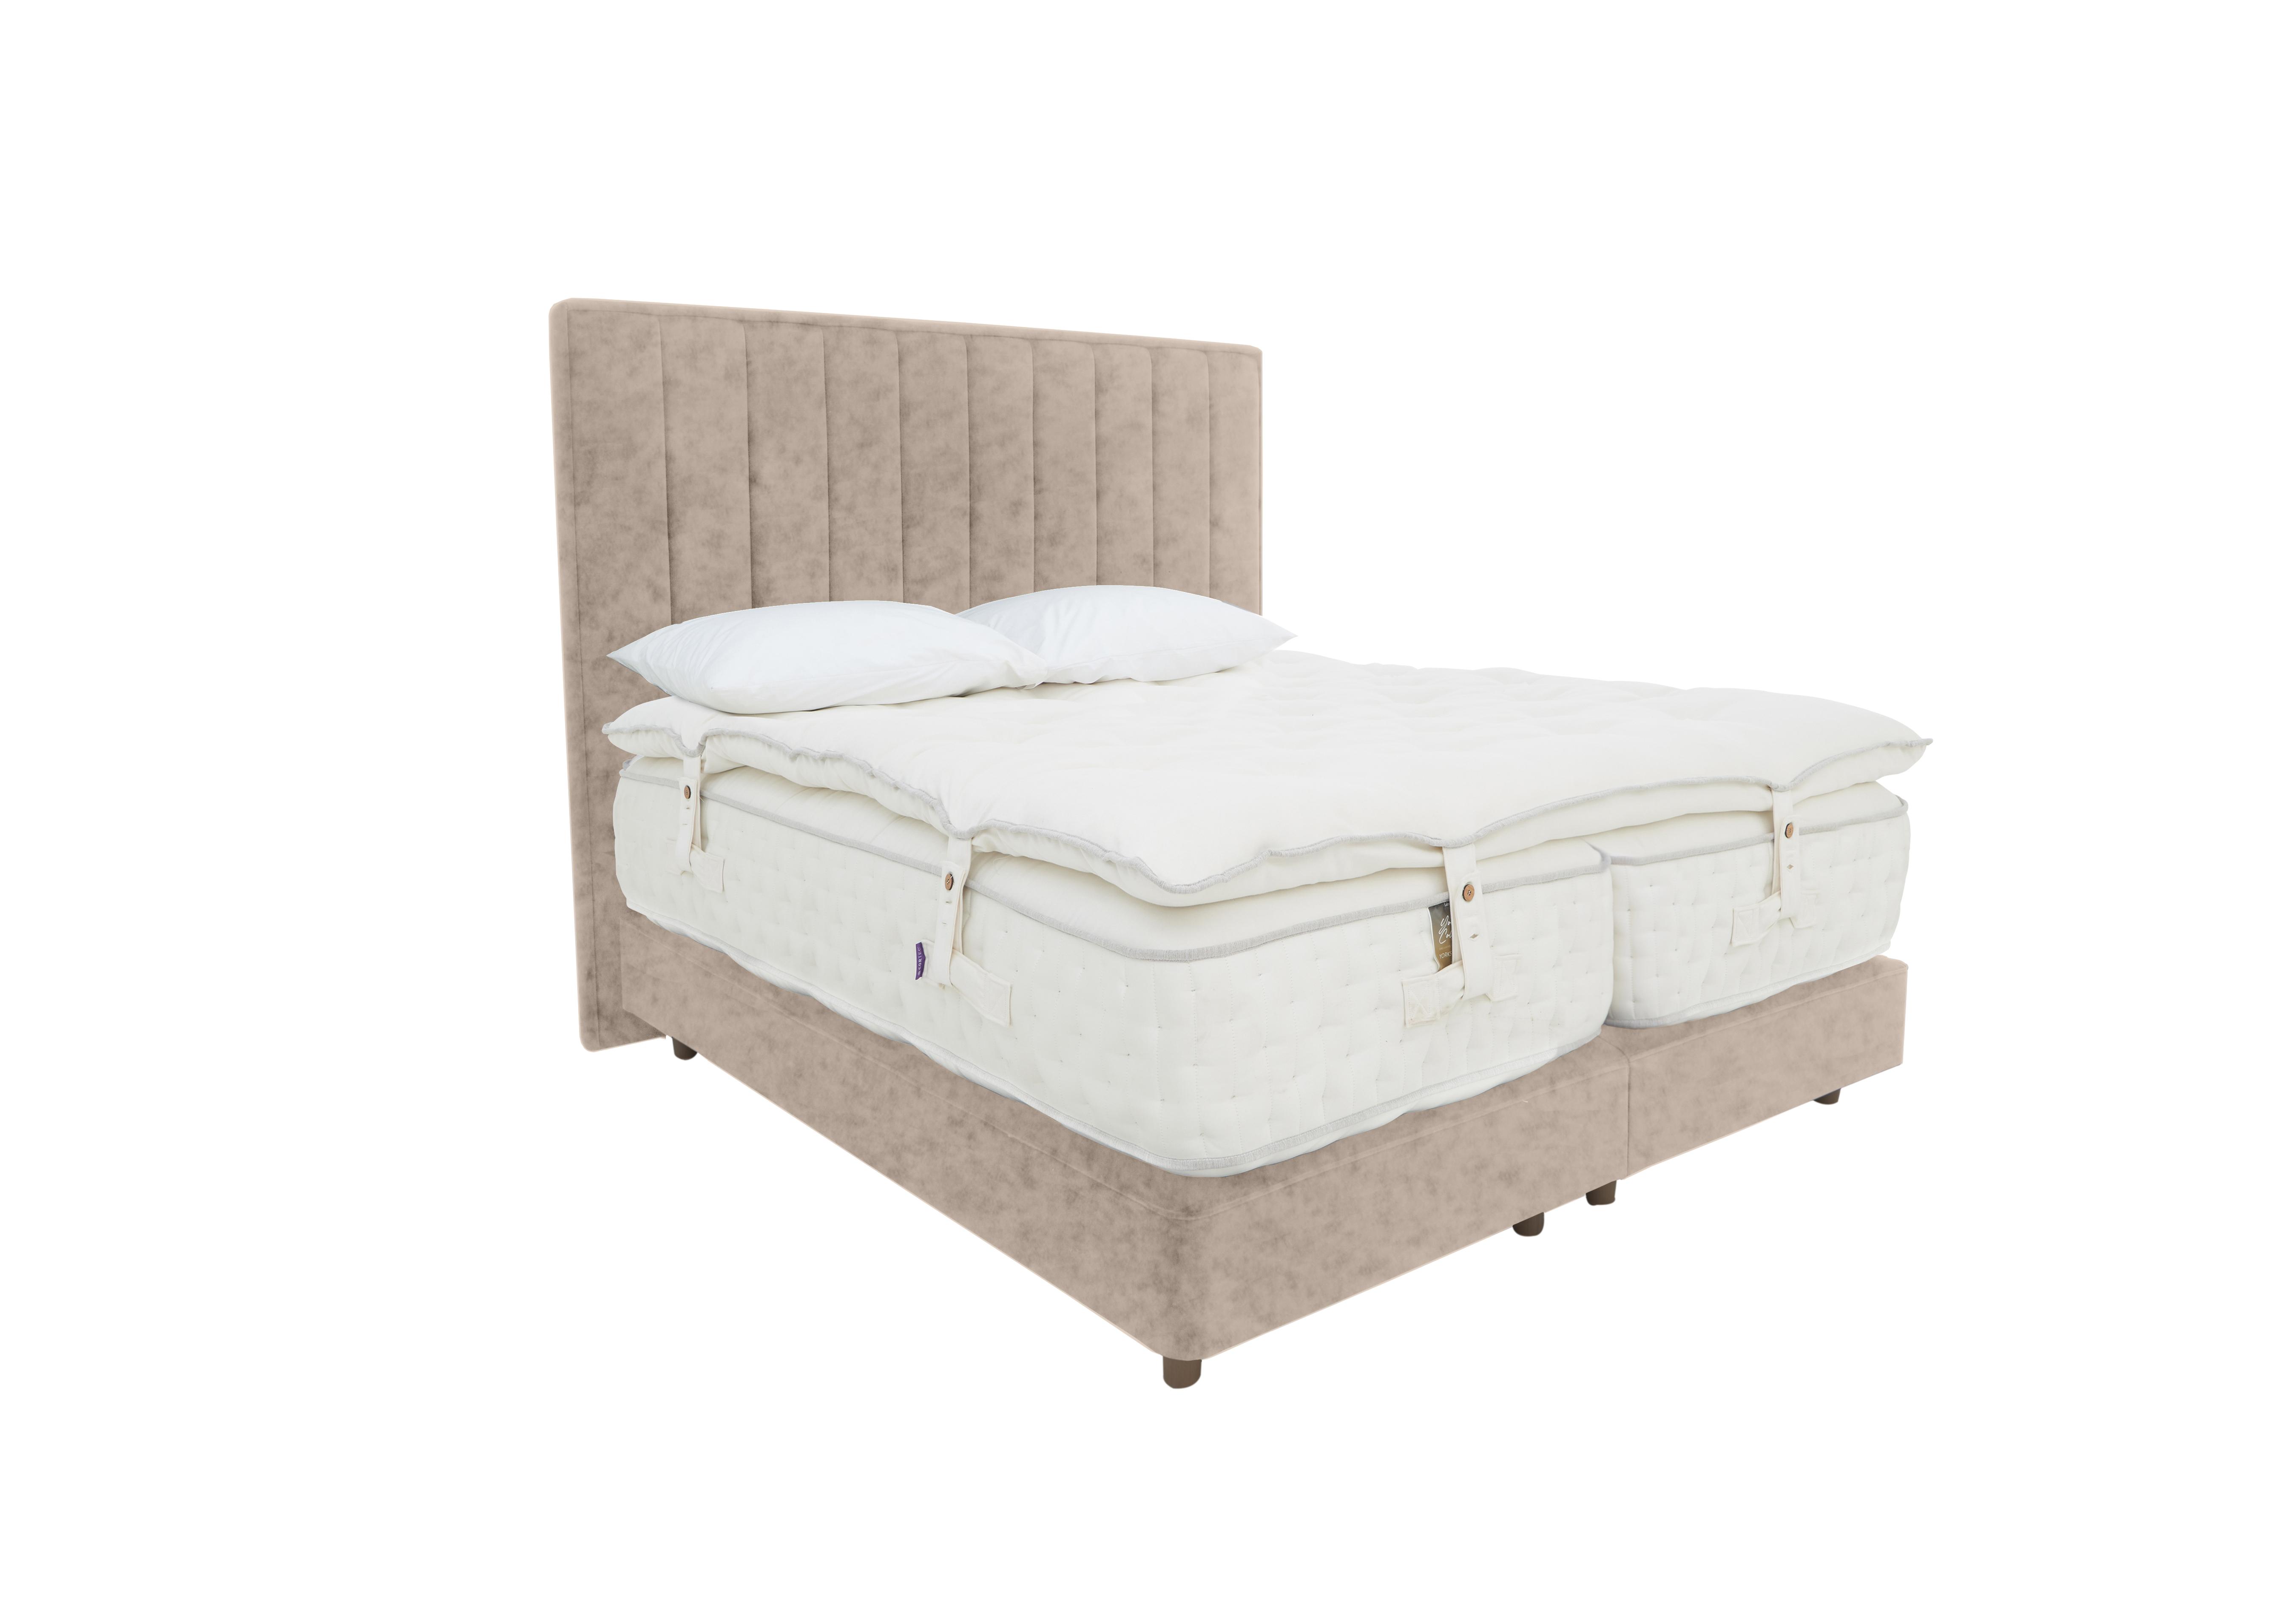 Yorkshire 40K Shallow Divan Set with Zip and Link Mattress with Mattress Topper in Opal Vellum on Furniture Village